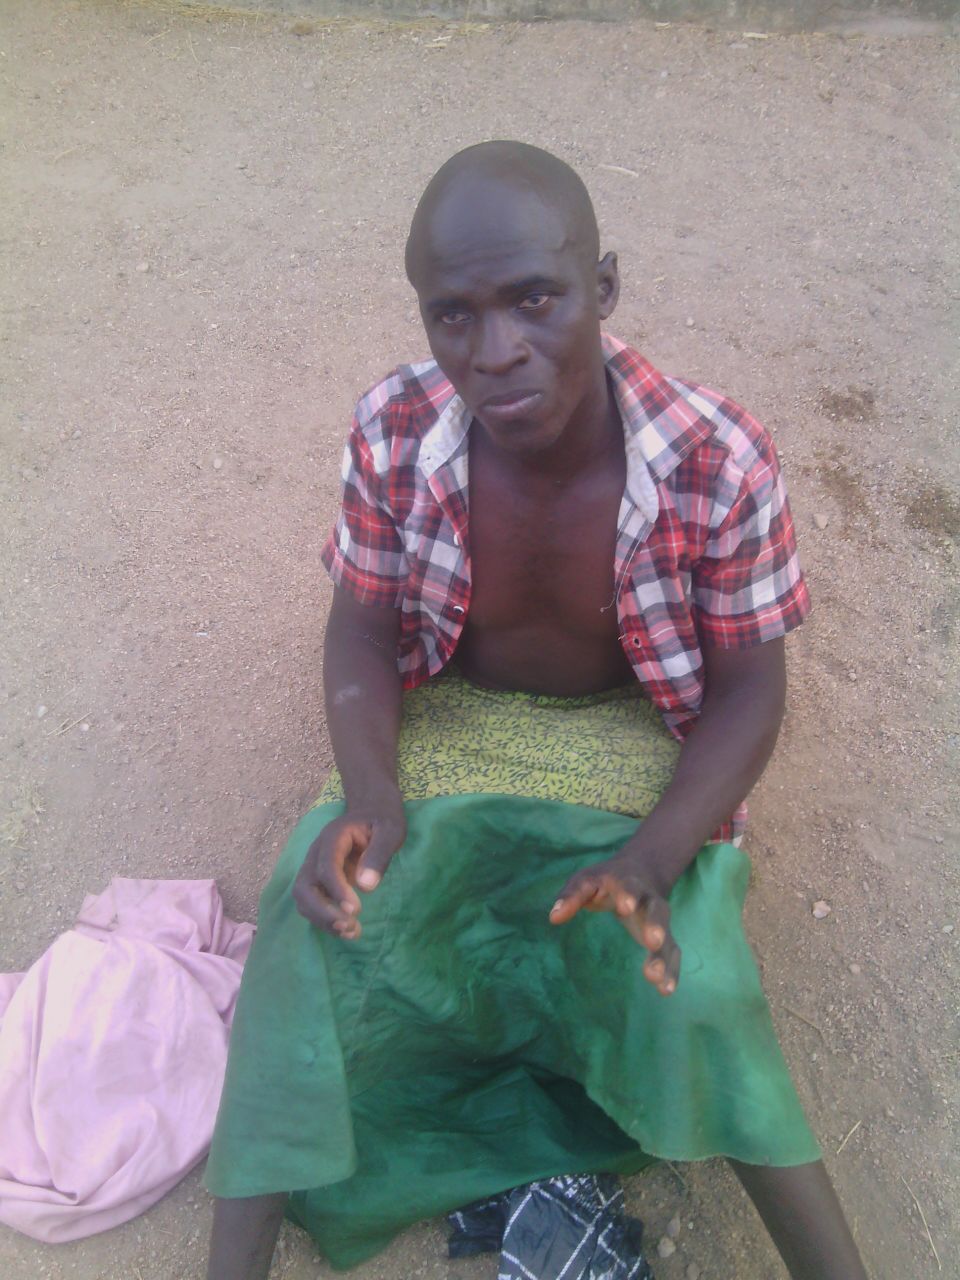 Male-terrorist-disguised-as-female-in-Hijab-nabbed-by-Nigerian-troops-as-he-made-for-market-in-Kwaya-Kusar-in-Borno-last-weekend-1